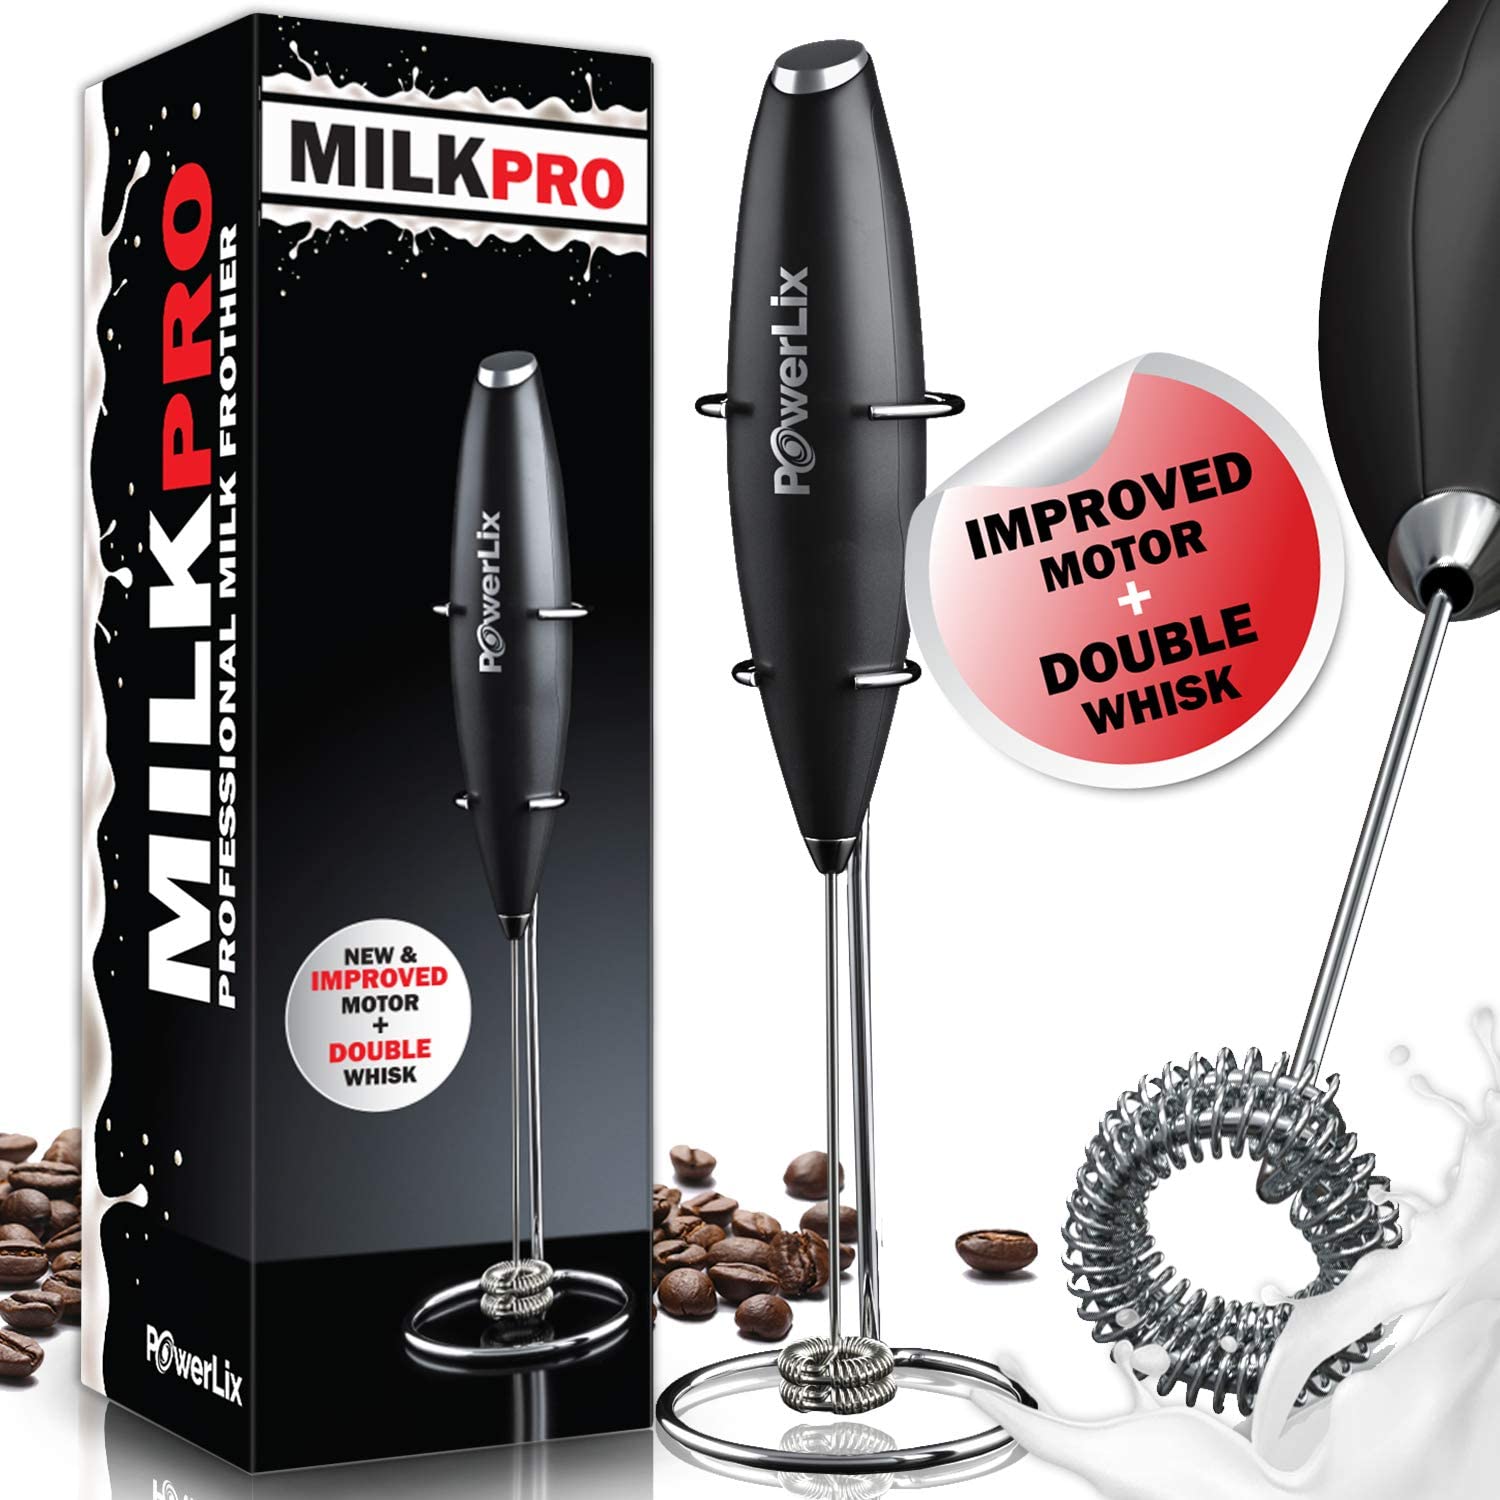 ELITAPRO ULTRA-HIGH-SPEED 19,000 RPM, Milk Frother DOUBLE WHISK, Unique  Detachable EGG BEATER and STAND For quick preparation (Black/Black) in 2023